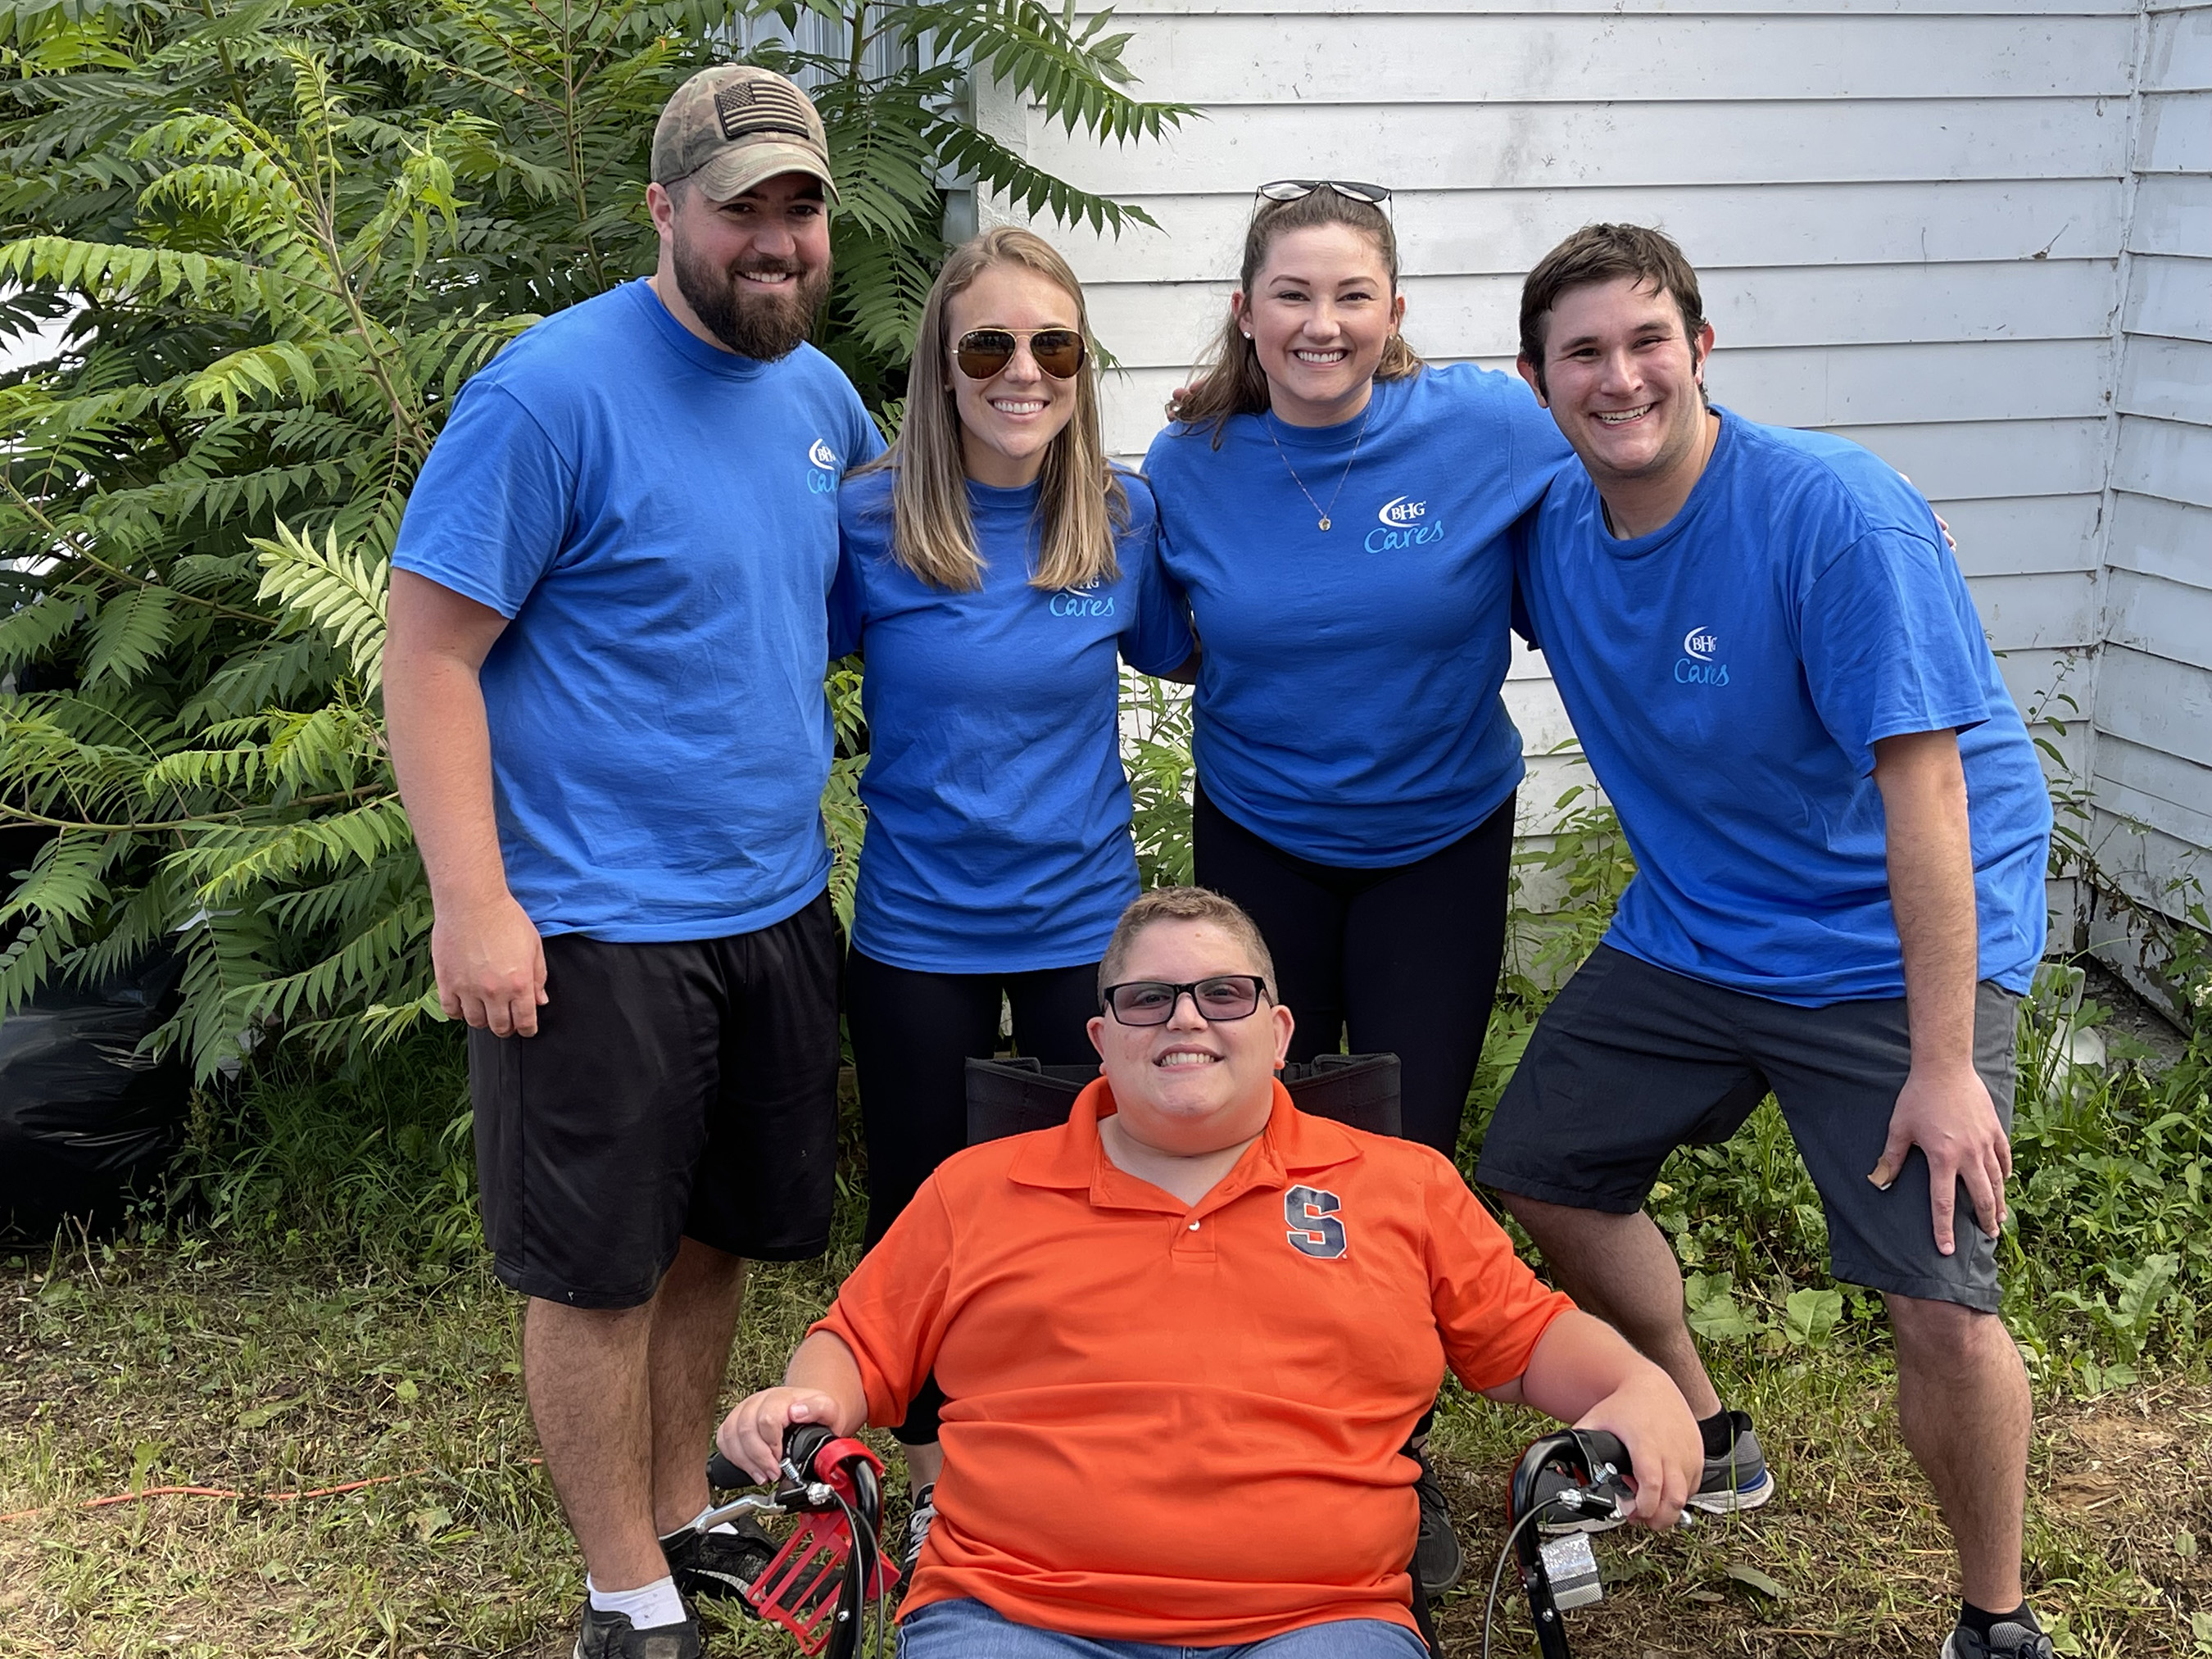 Make-A-Wish Central New York teamed up with BHG Financial to give surprise 15-year-old Joey with outdoor adventure equipment, including a three-wheeled recumbent bike and double-swing glider.